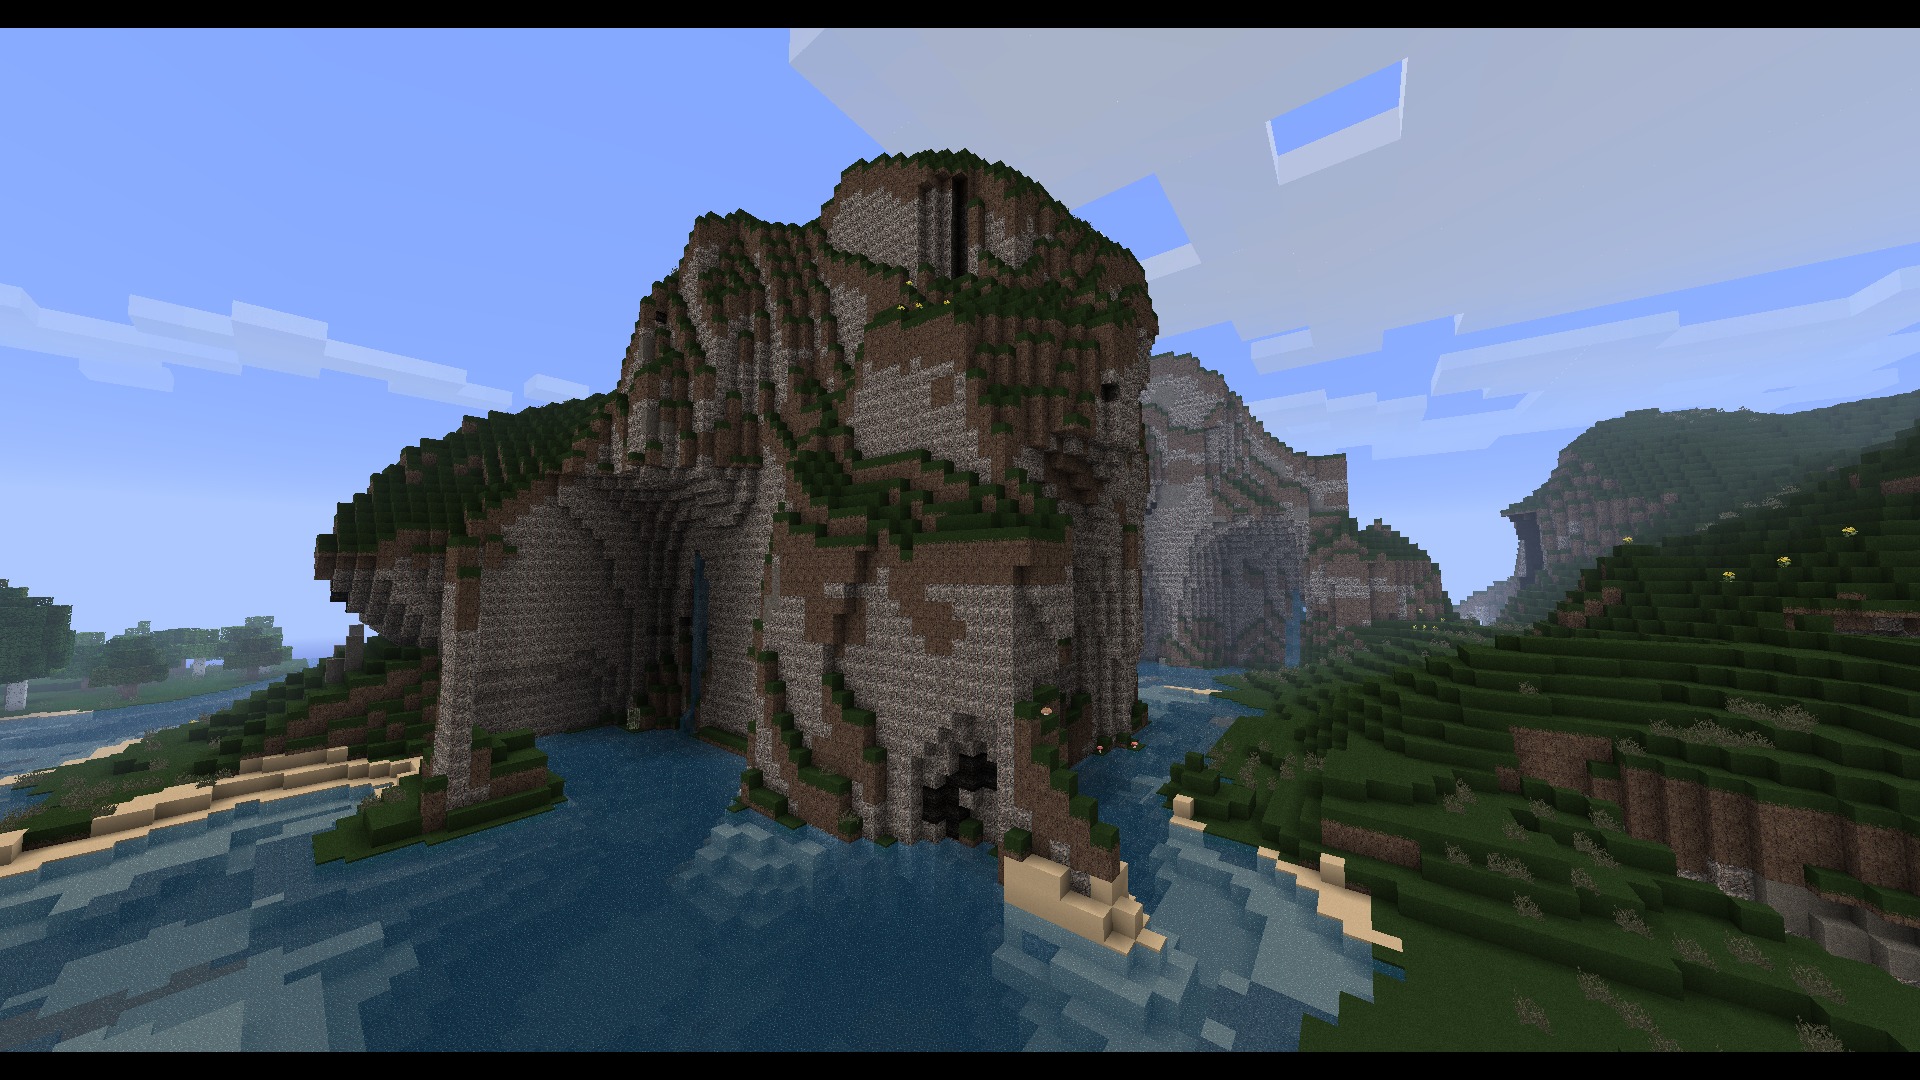 Pixelated Land Wide Wallpaper - Mona Lisa Crafted Minecraft , HD Wallpaper & Backgrounds